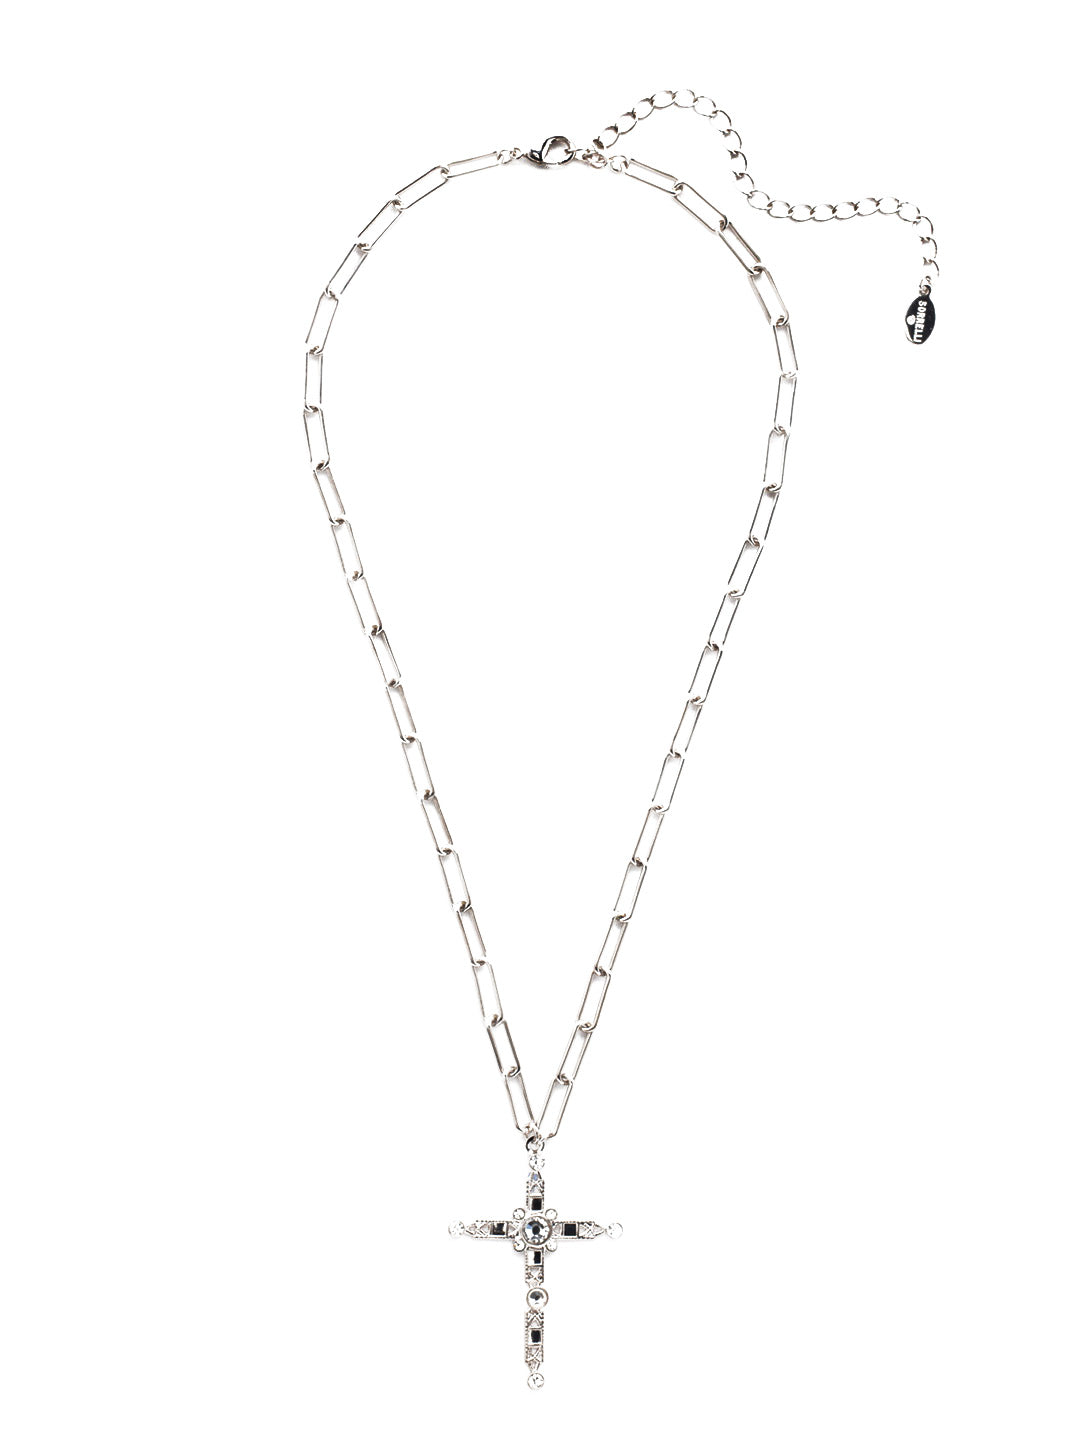 Norah Cross Pendant Necklace - NEX11PDCRY - <p>The Norah Cross Pendant Necklace hosts a modern style cross pendant, overlaid with various crystals and hanging from an adjustable, trendy paperclip chain. From Sorrelli's Crystal collection in our Palladium finish.</p>